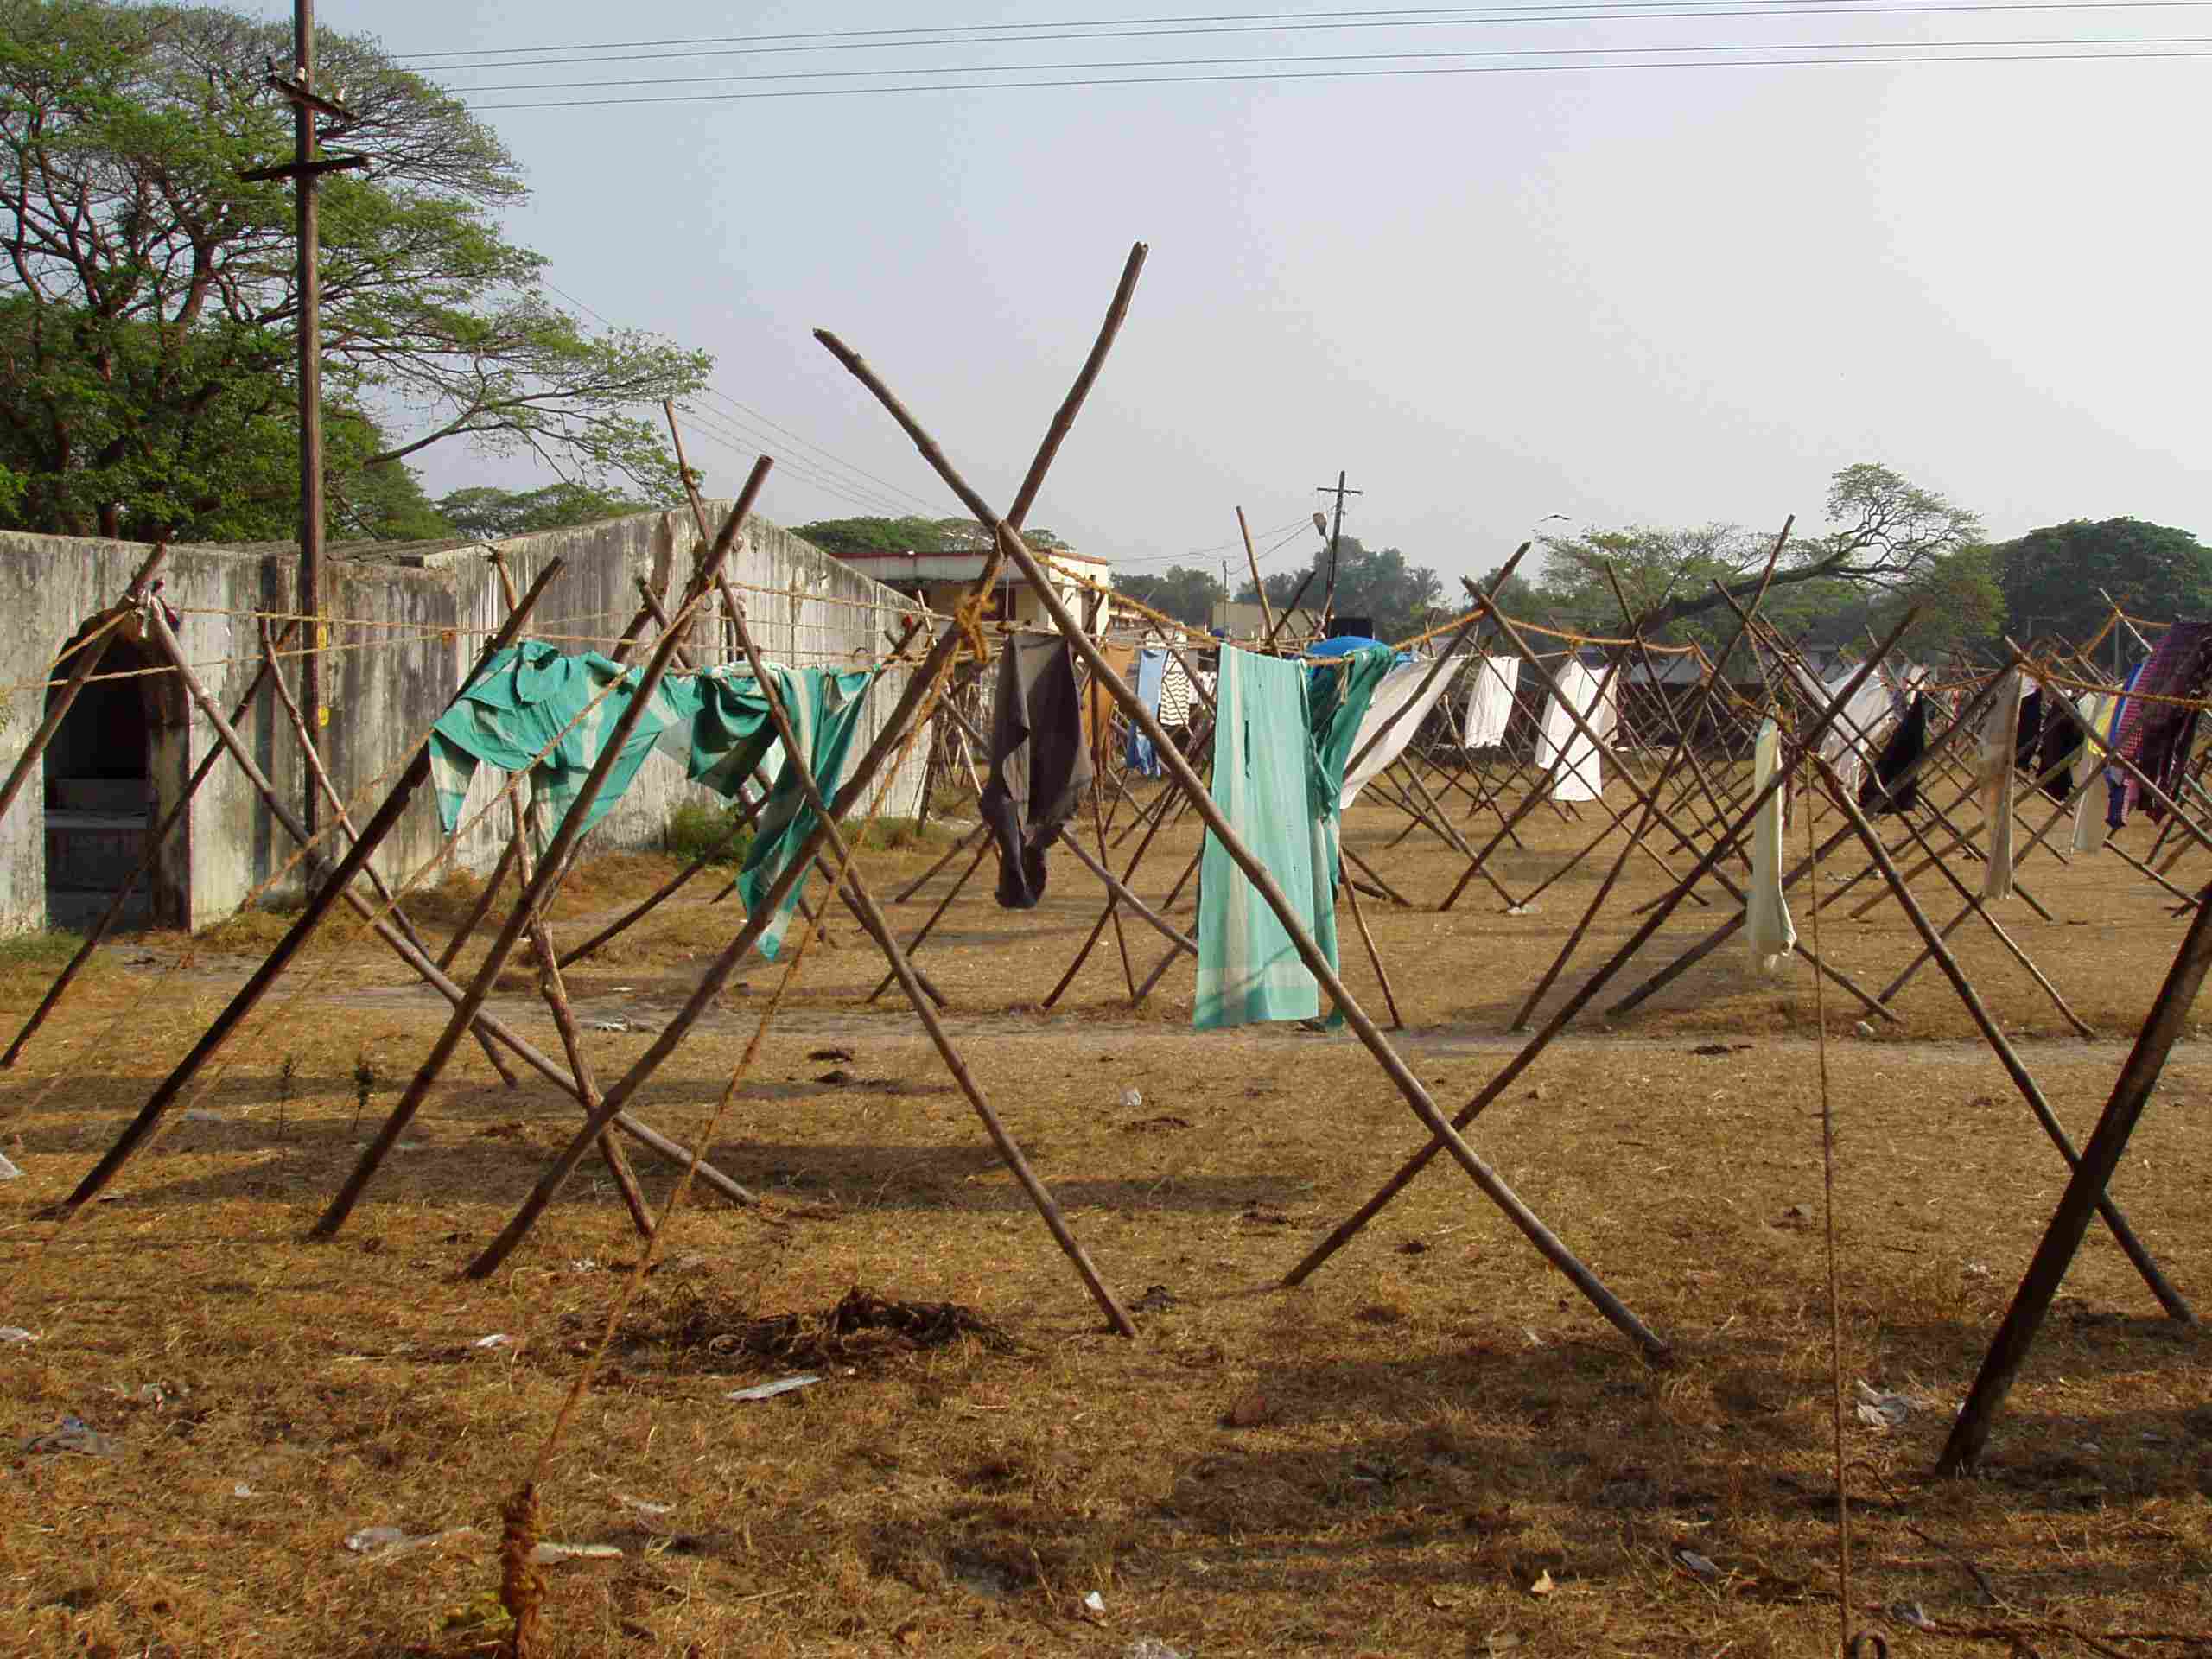 Drying in open air